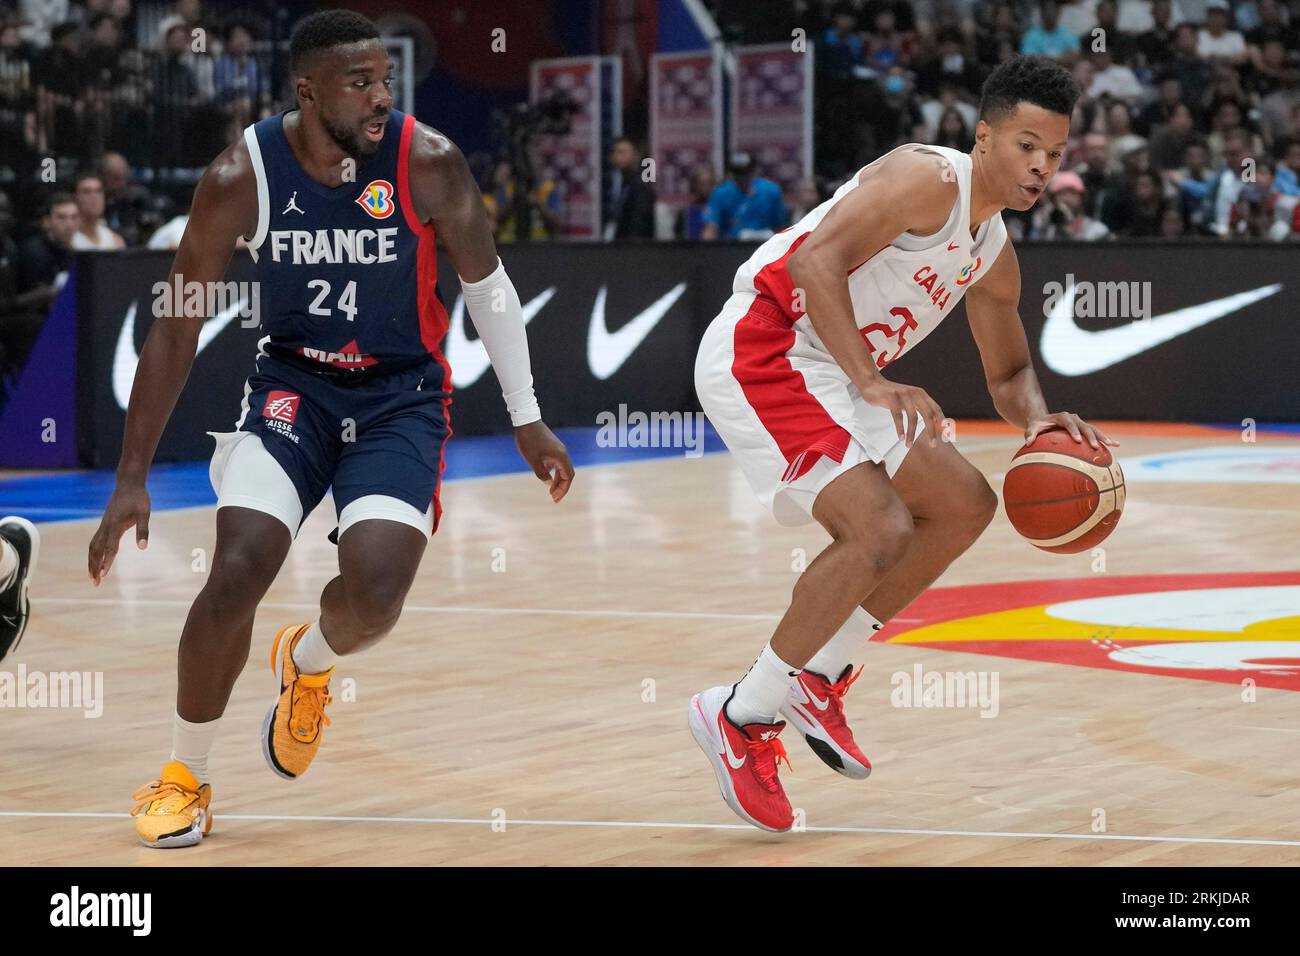 Canada guard Trae Bell-Haynes (25) dribbles past France guard Yakuba  Ouattara (24) during the Basketball World Cup group H match between France  and Canada at the Indonesia Arena stadium in Jakarta, Indonesia,